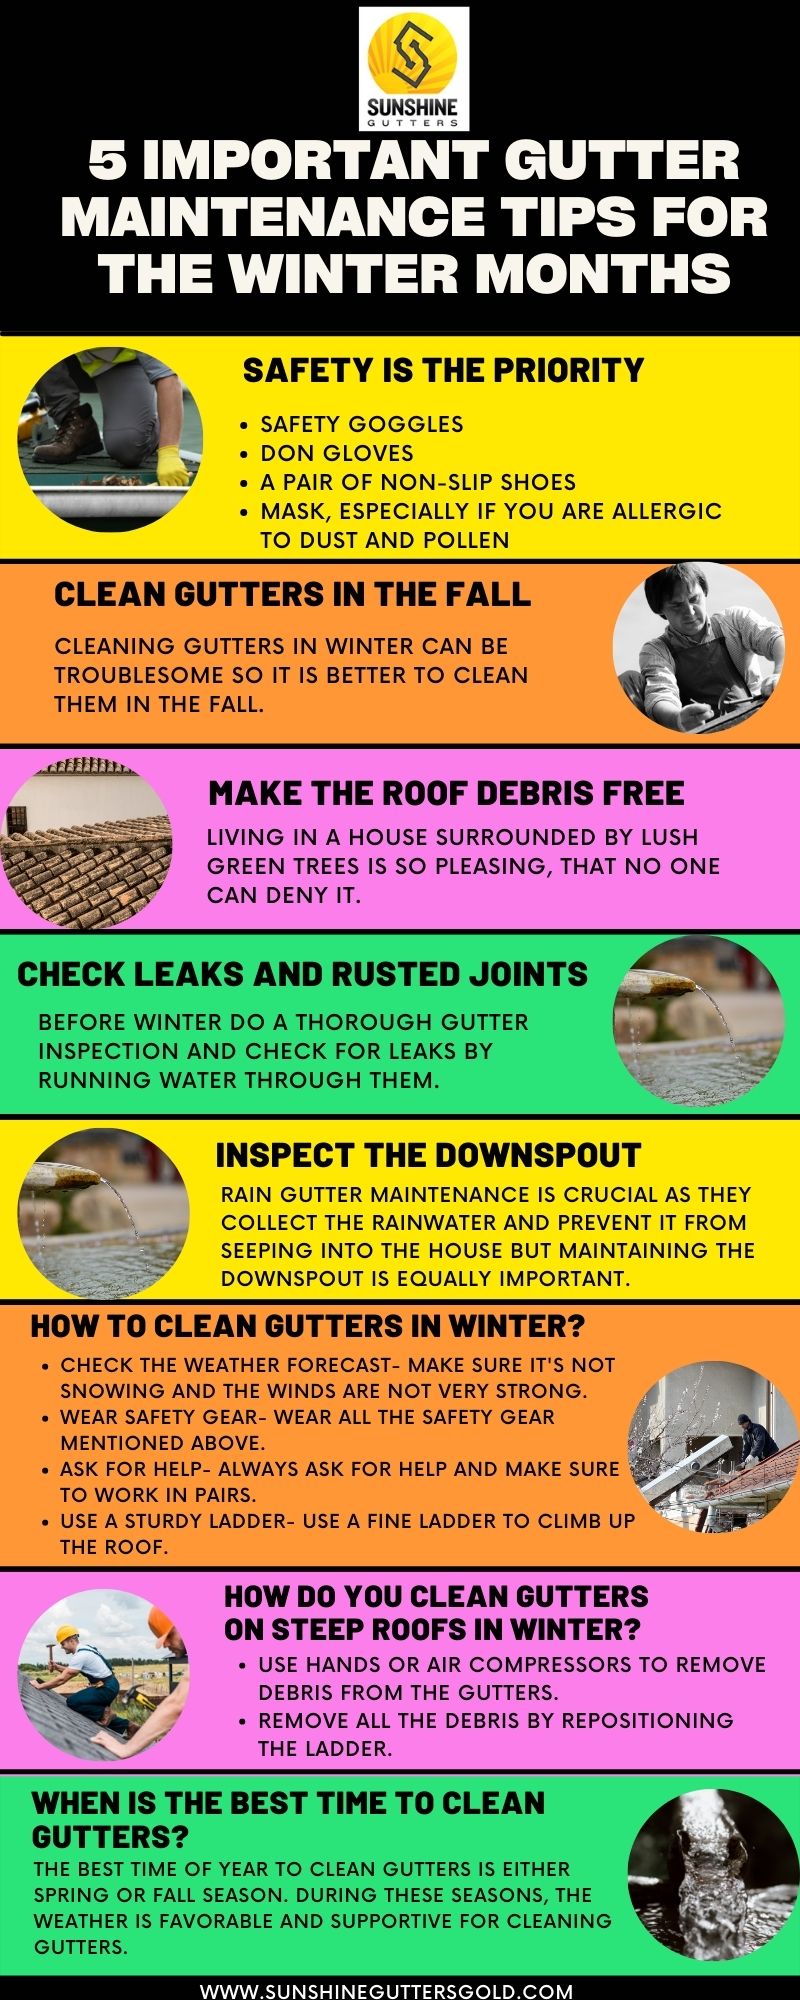 5 Important Gutter Maintenance Tips For The Winter Months